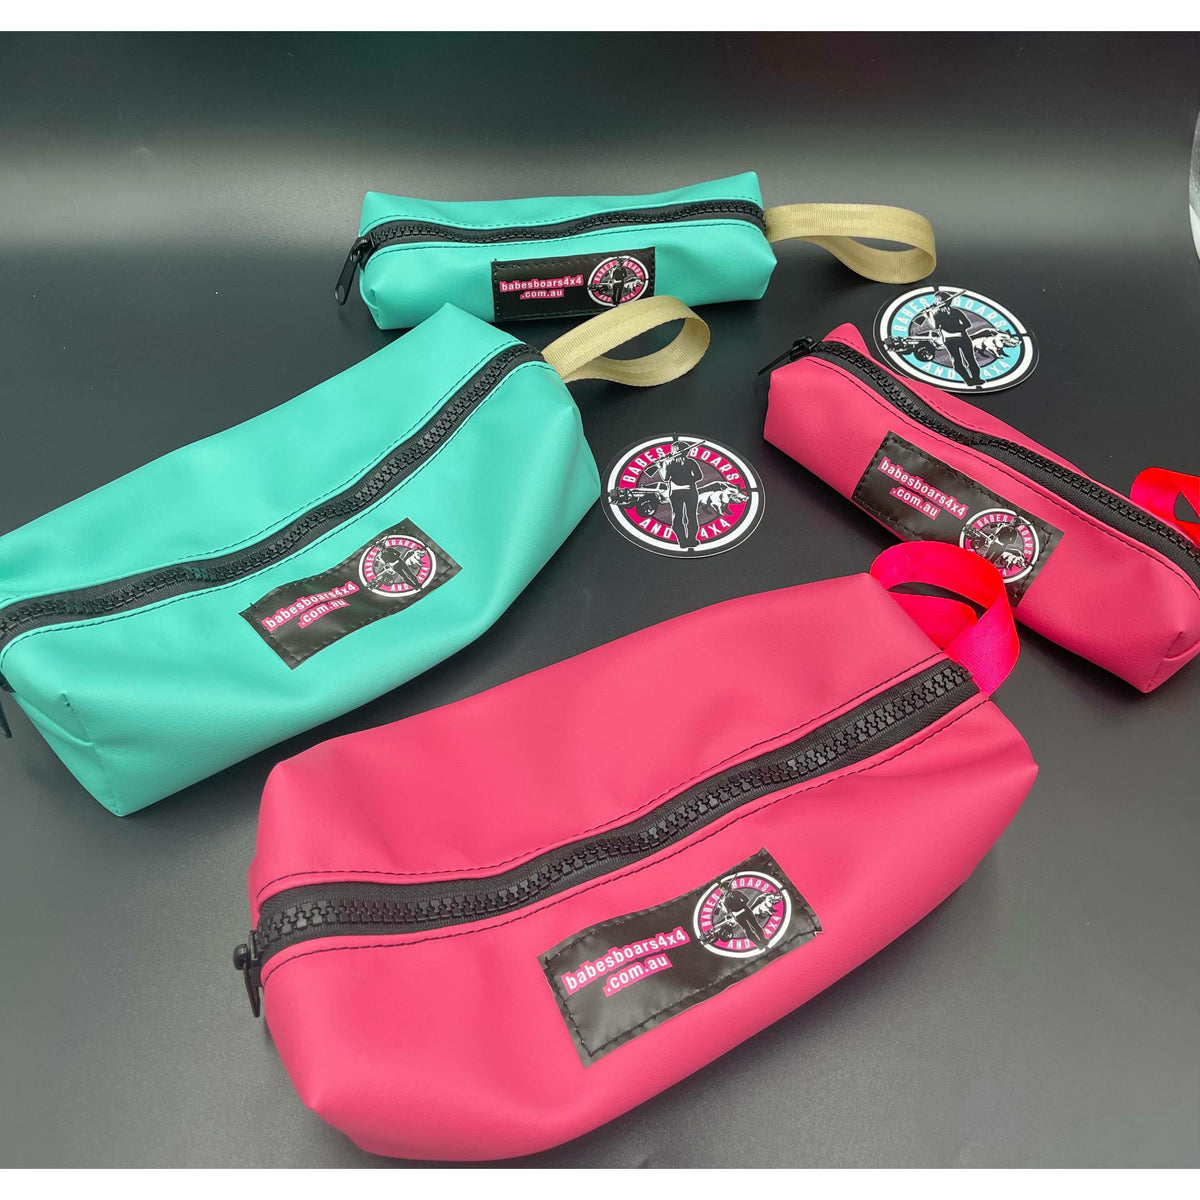 BB4x4 Pencil Case Twin Pack